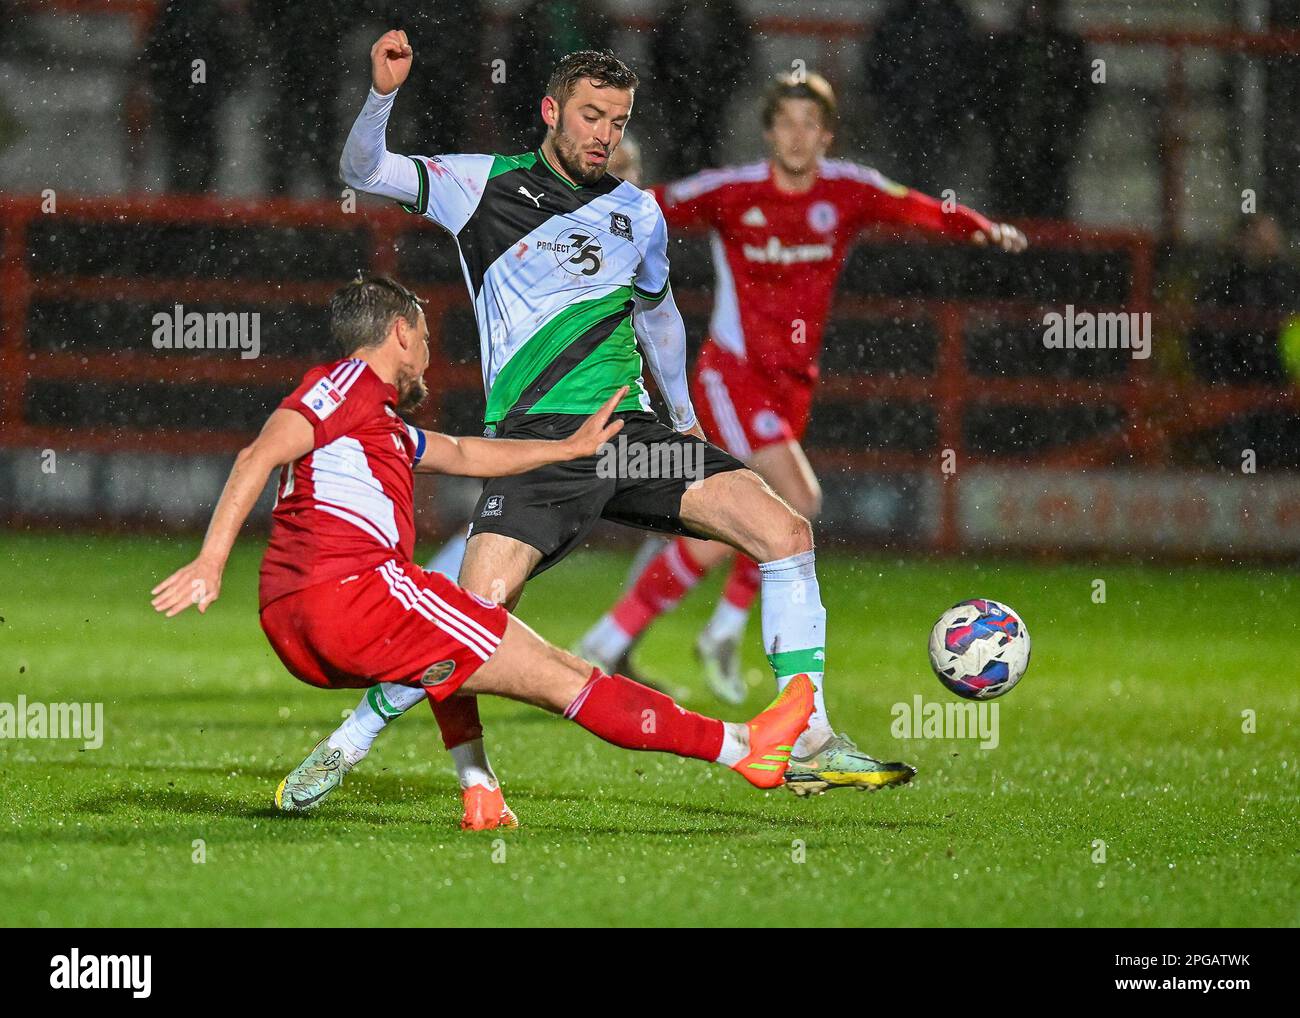 Matt Butcher#7 of Plymouth Argyle defending during the Sky Bet League 1 match Accrington Stanley vs Plymouth Argyle at Wham Stadium, Accrington, United Kingdom, 21st March 2023  (Photo by Stan Kasala/News Images) Stock Photo